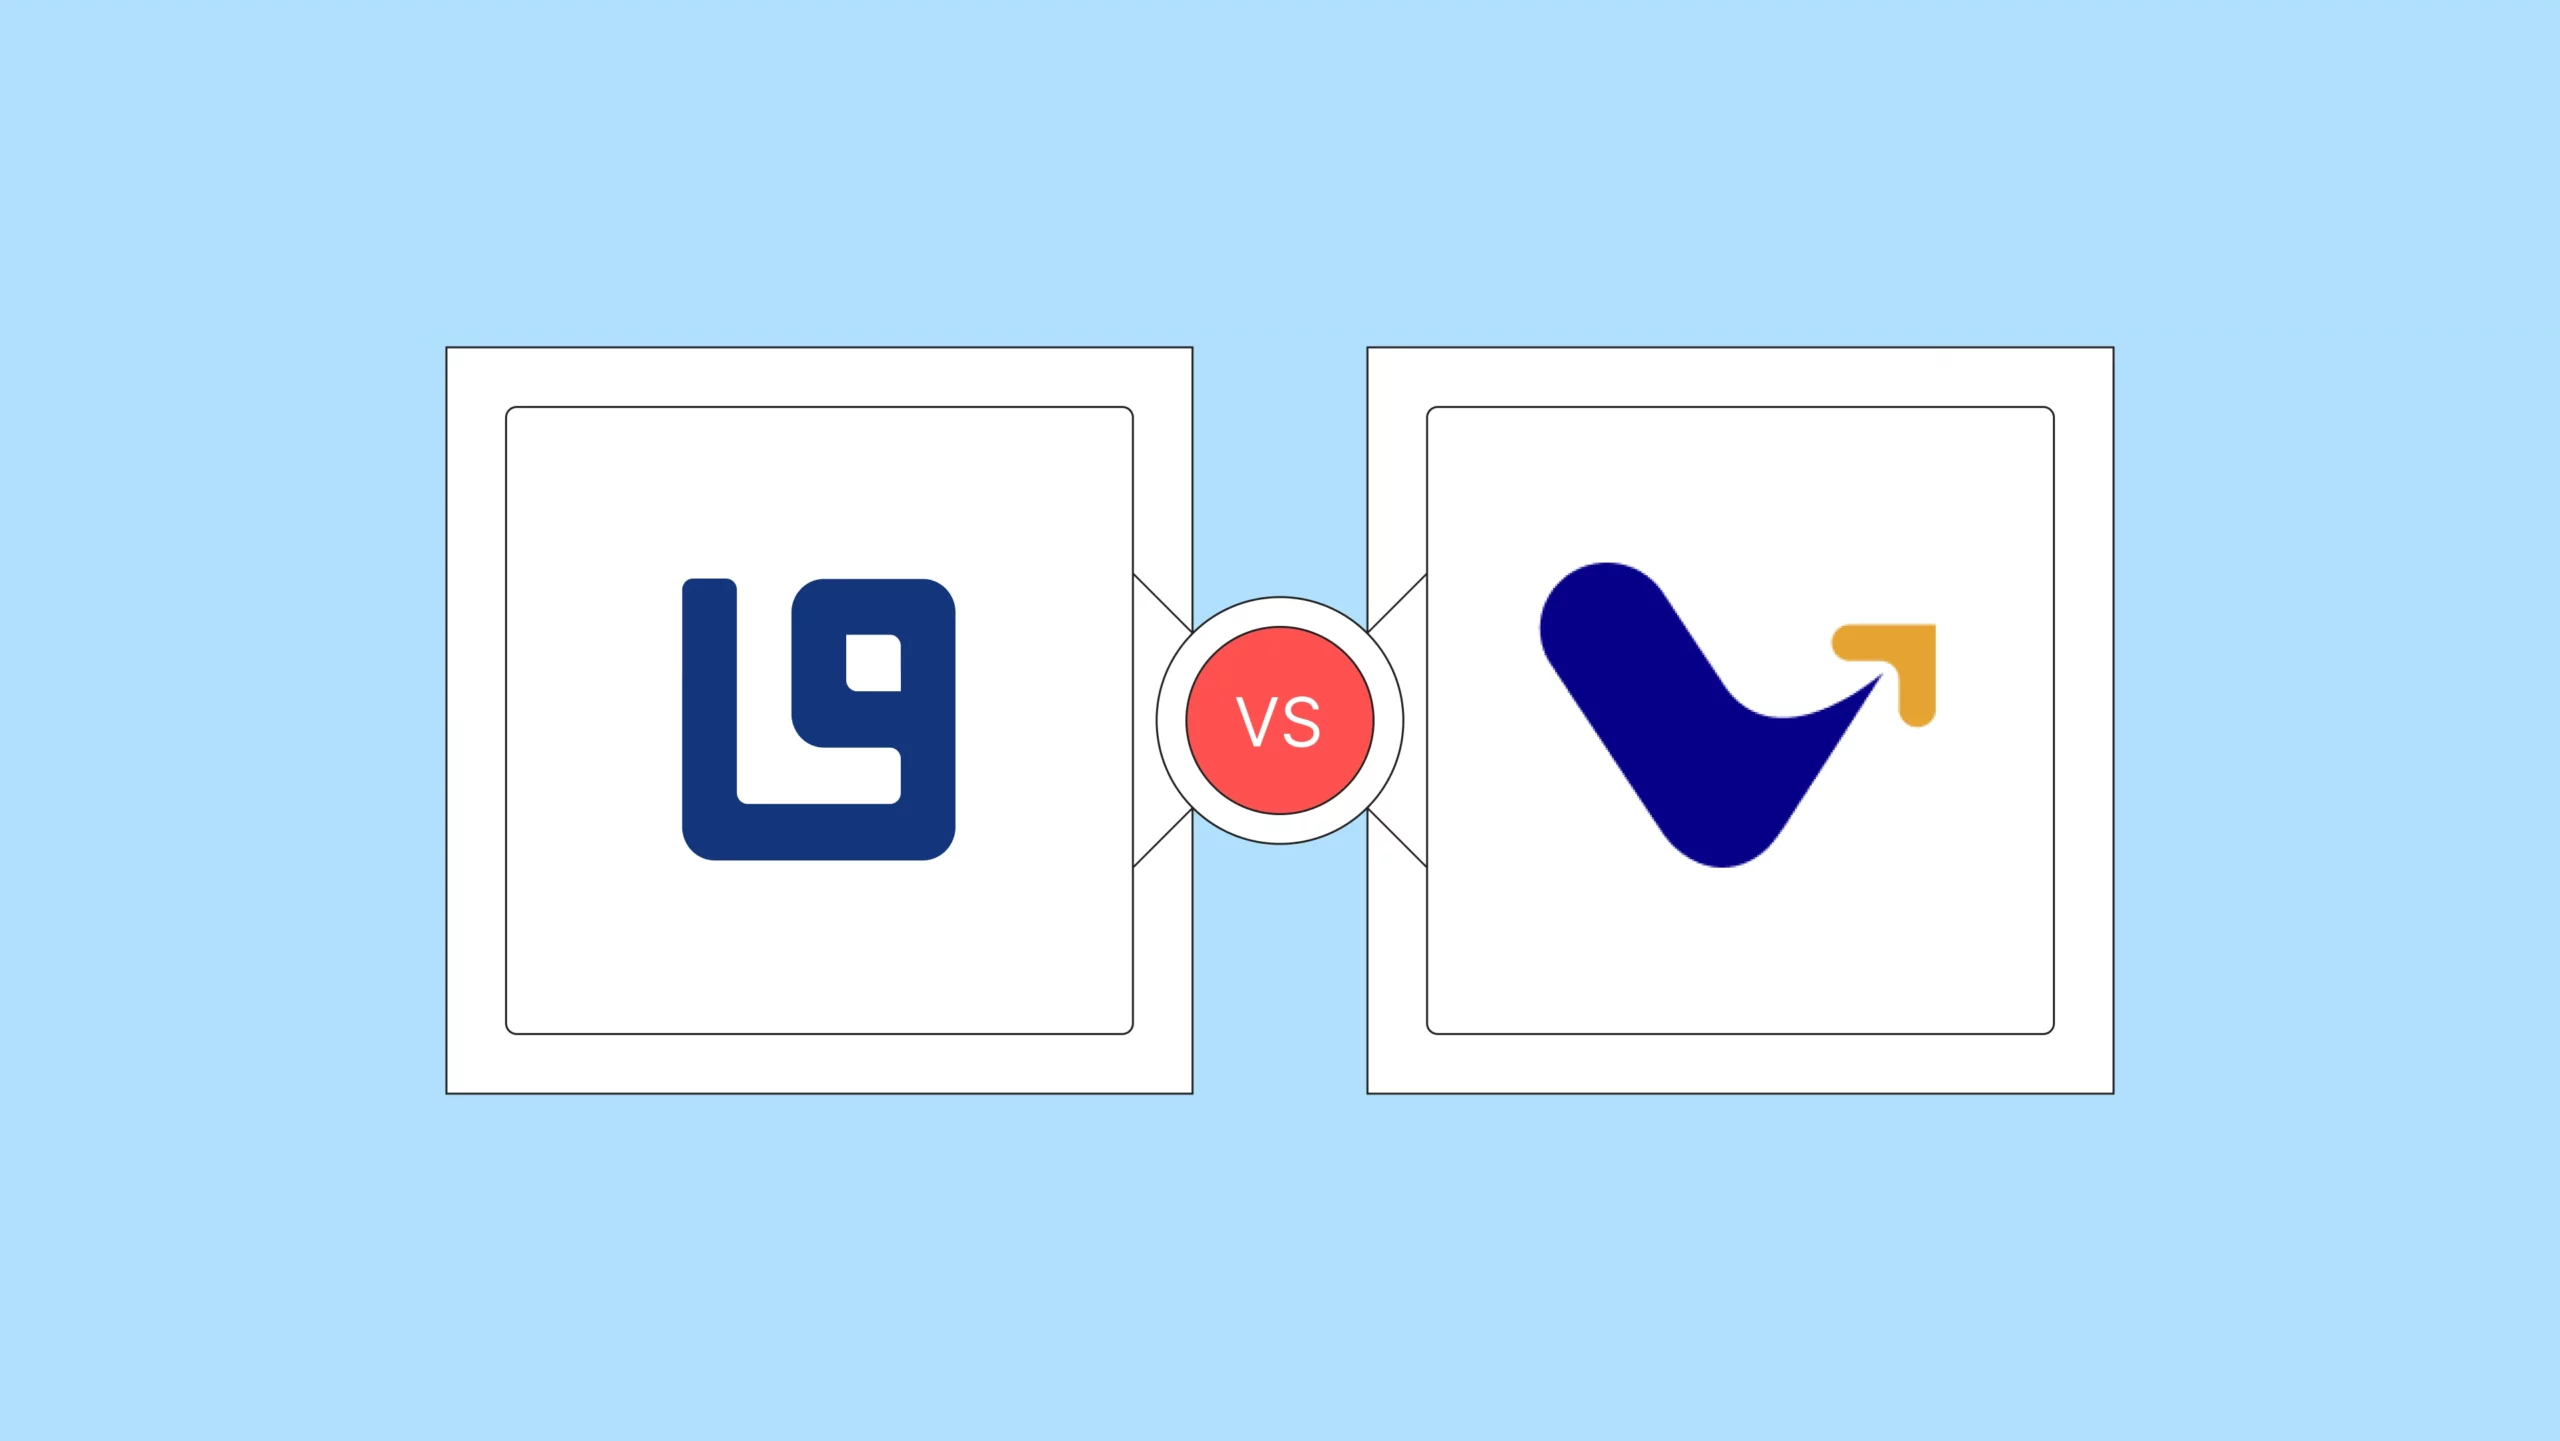 VeendHQ Vs. Lendsqr: Which loan management software is right for you?